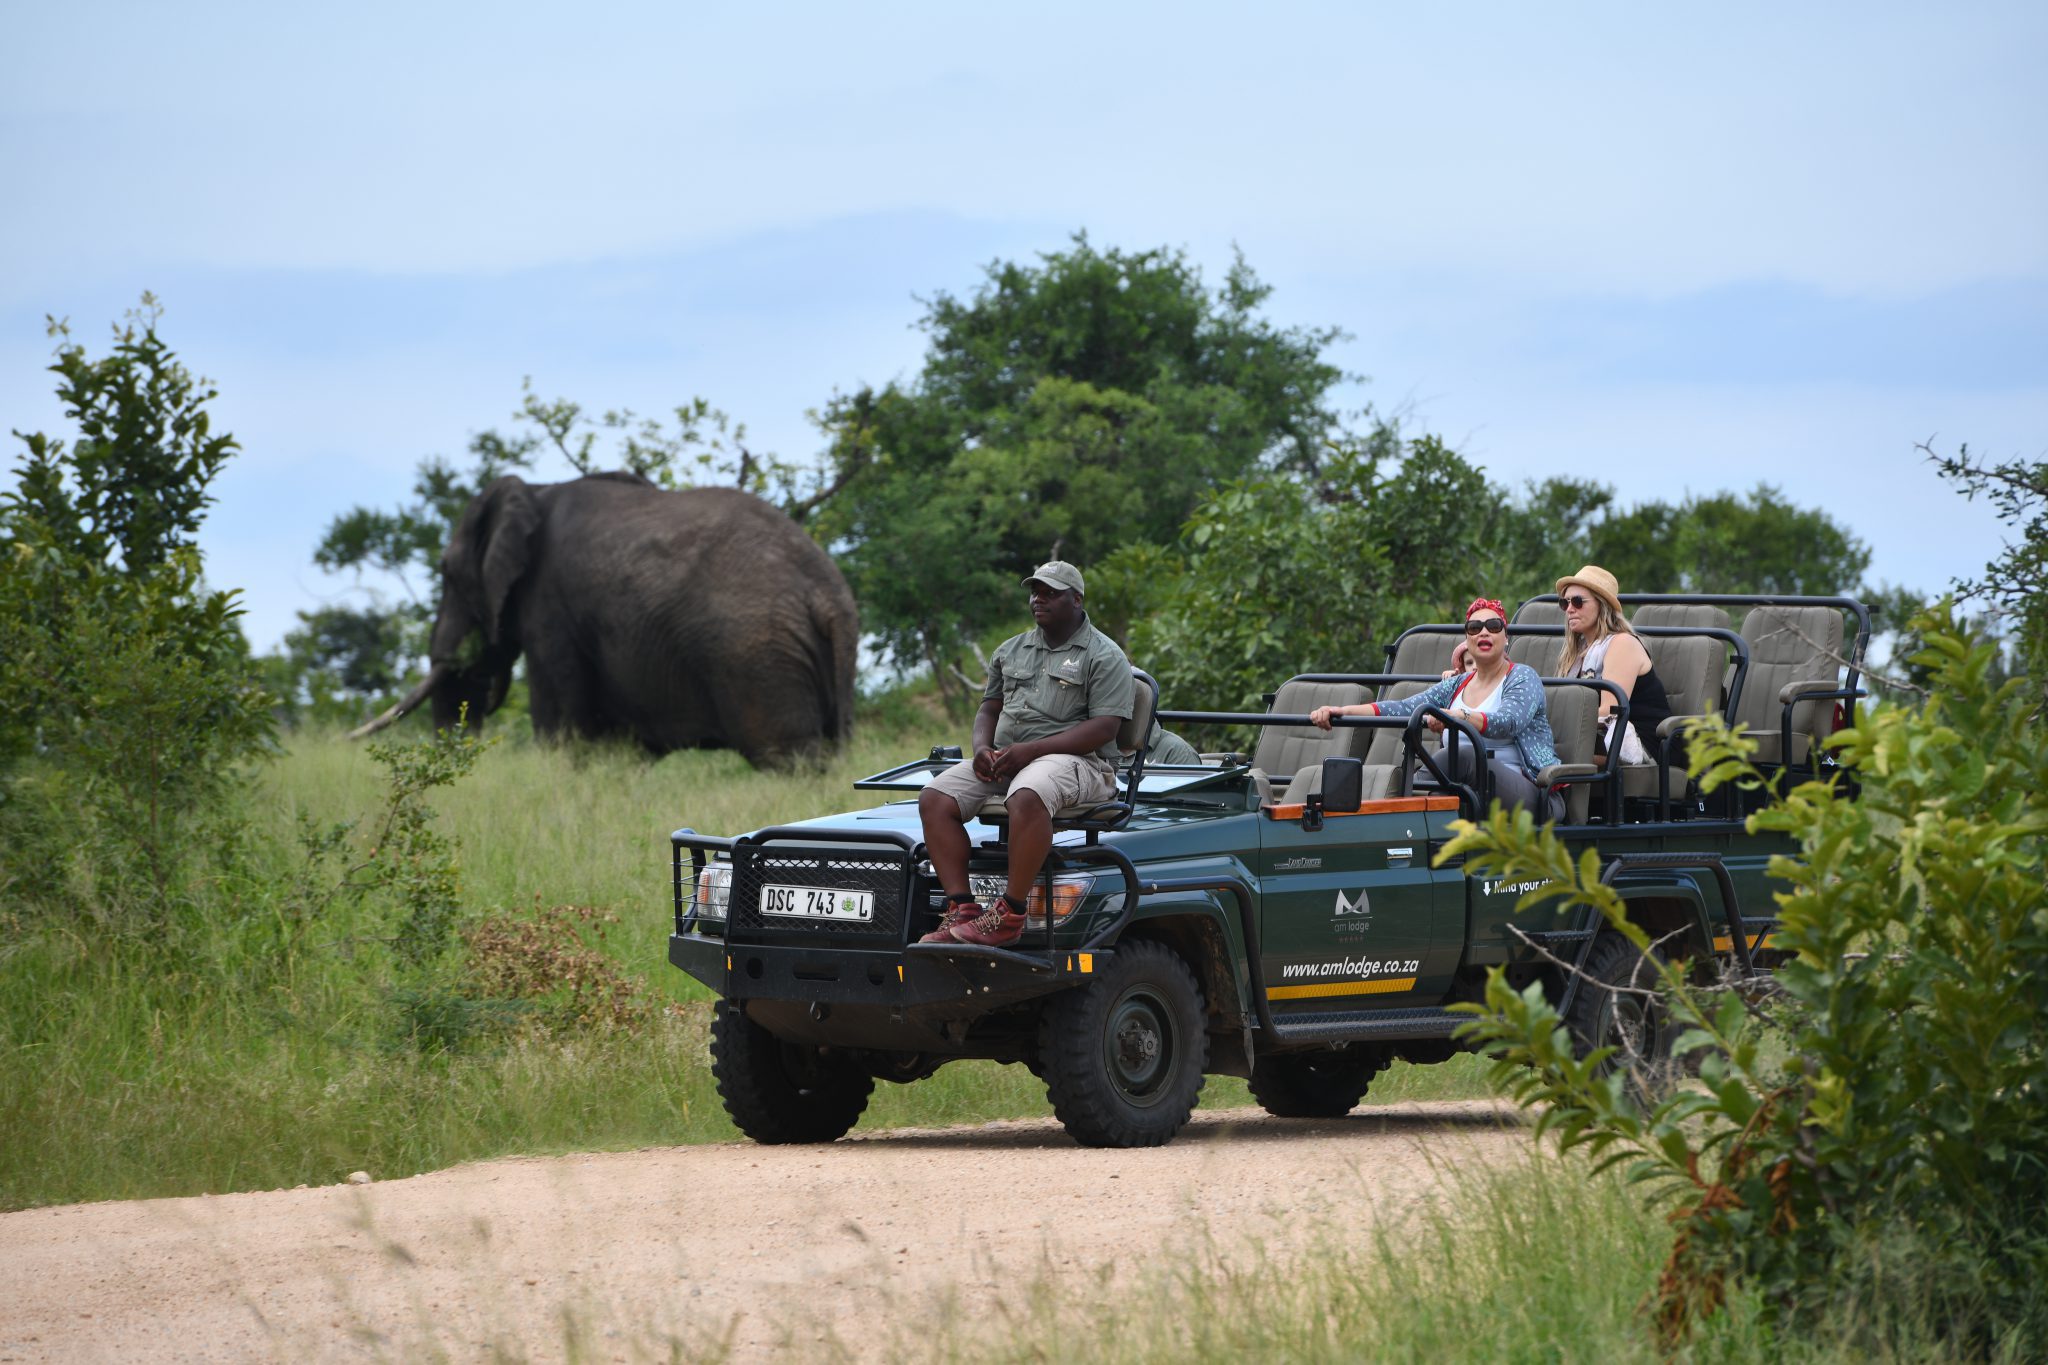 Family-friendly safari in South Africa